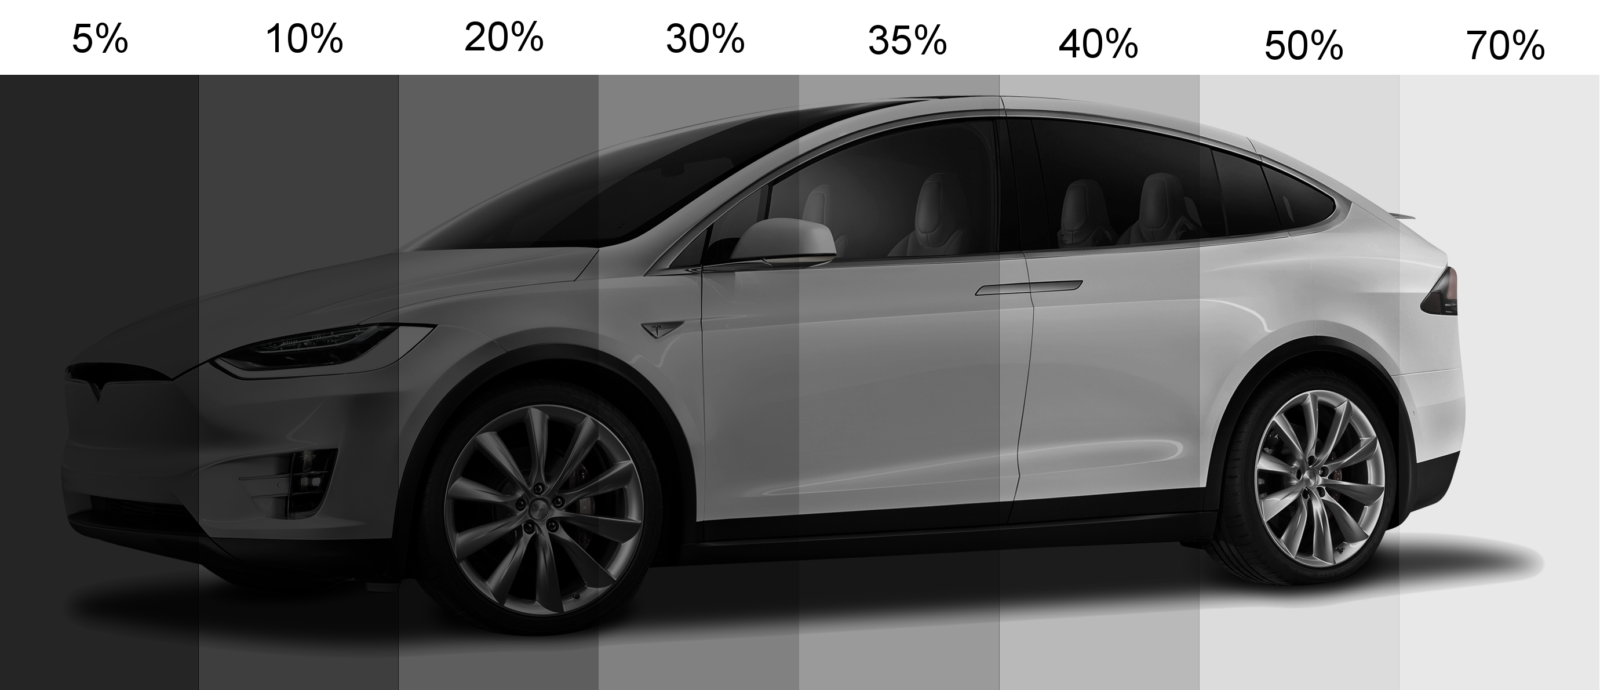 Window Tinting Percentages Chart